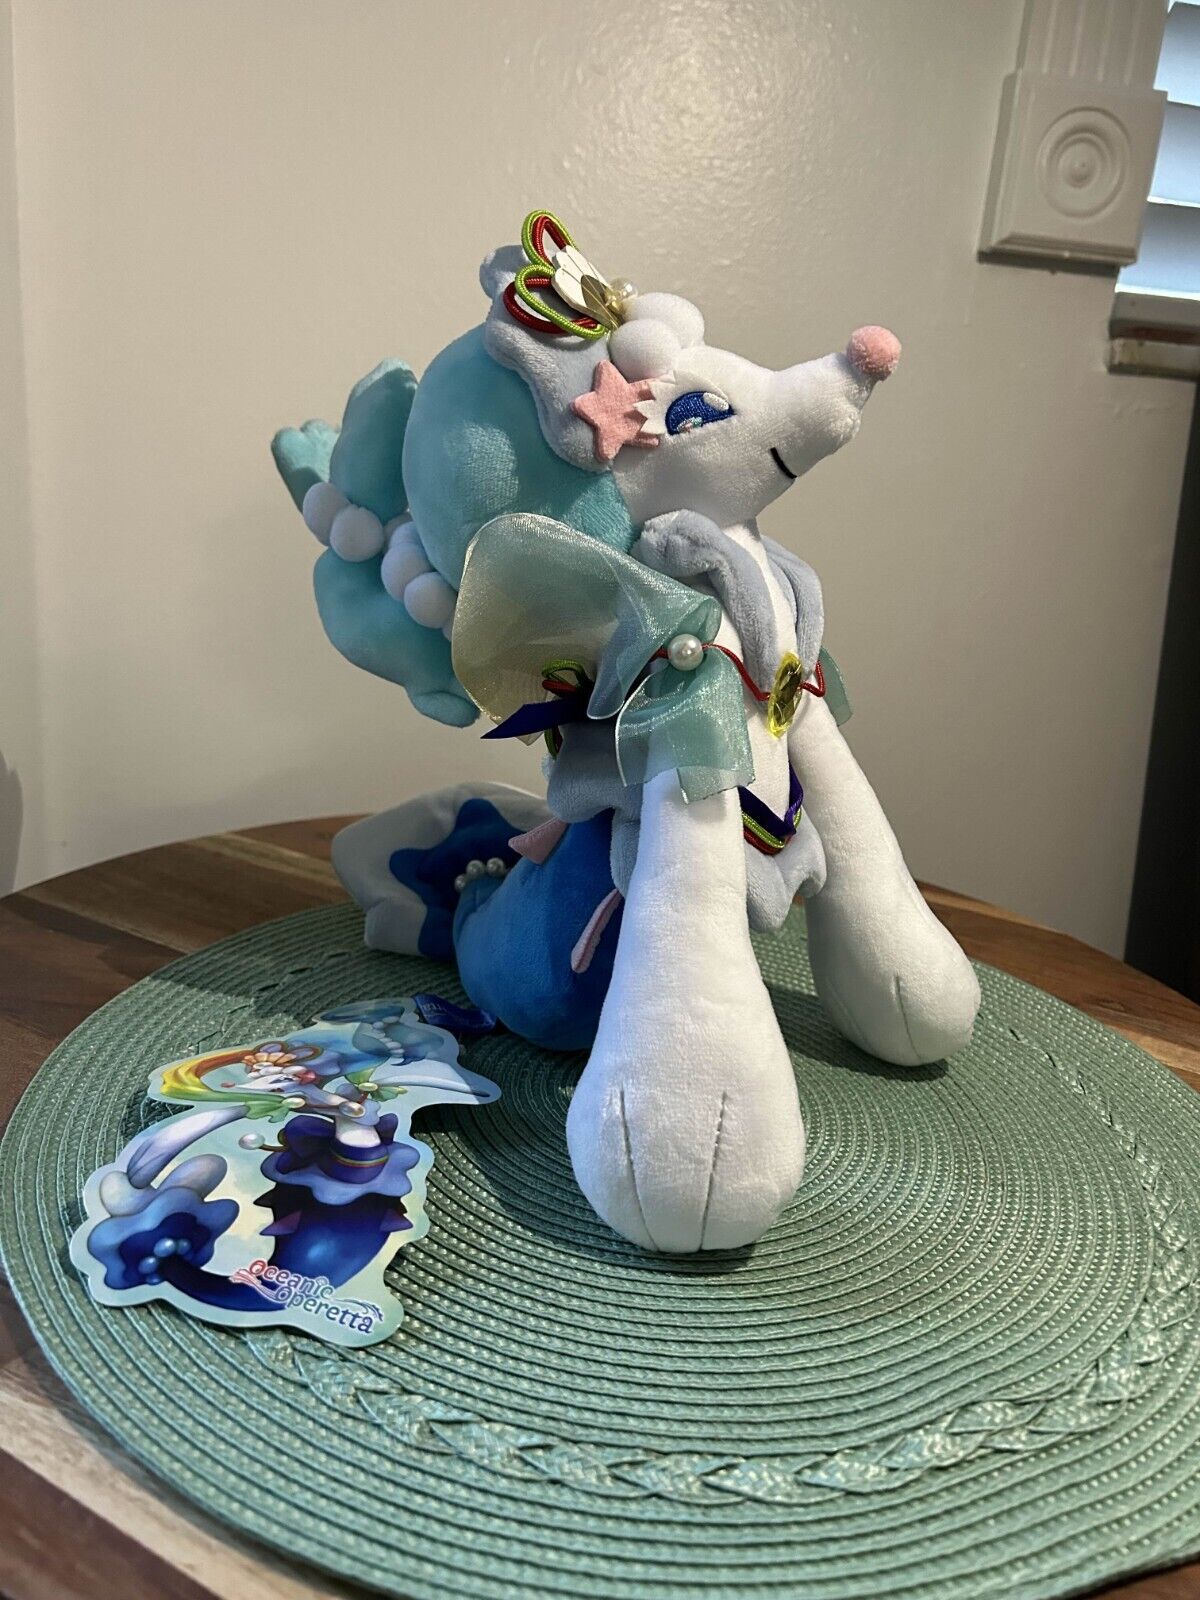 Oceanic Operatta Primarina Plush - Japan Pokecenter Exclusive, with Tags